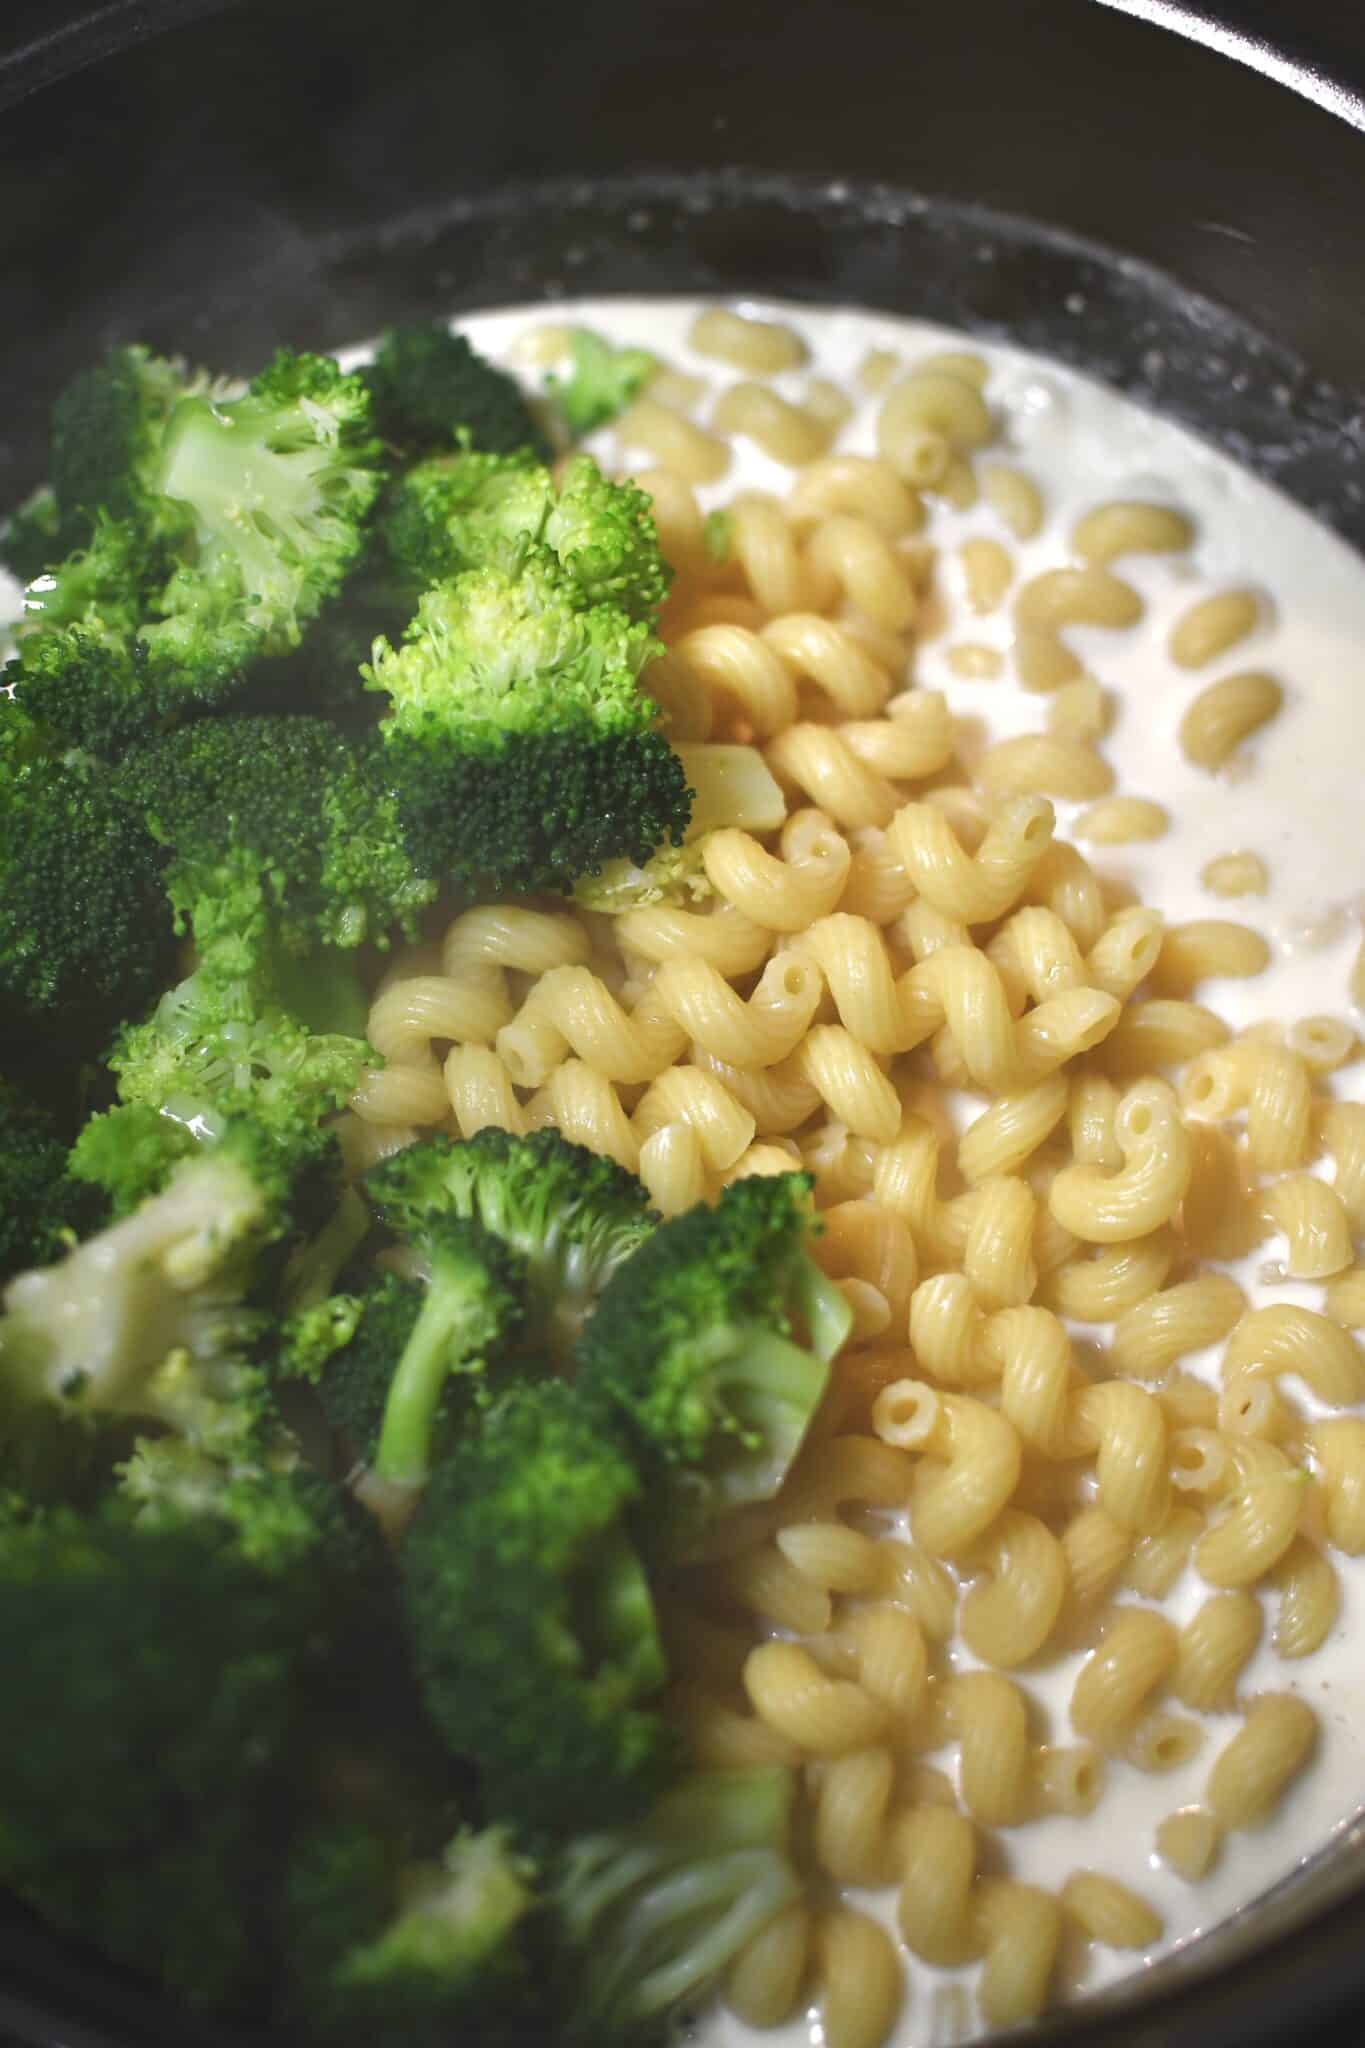 Adding cooked pasta and blanched and shocked broccoli to the alfredo sauce.